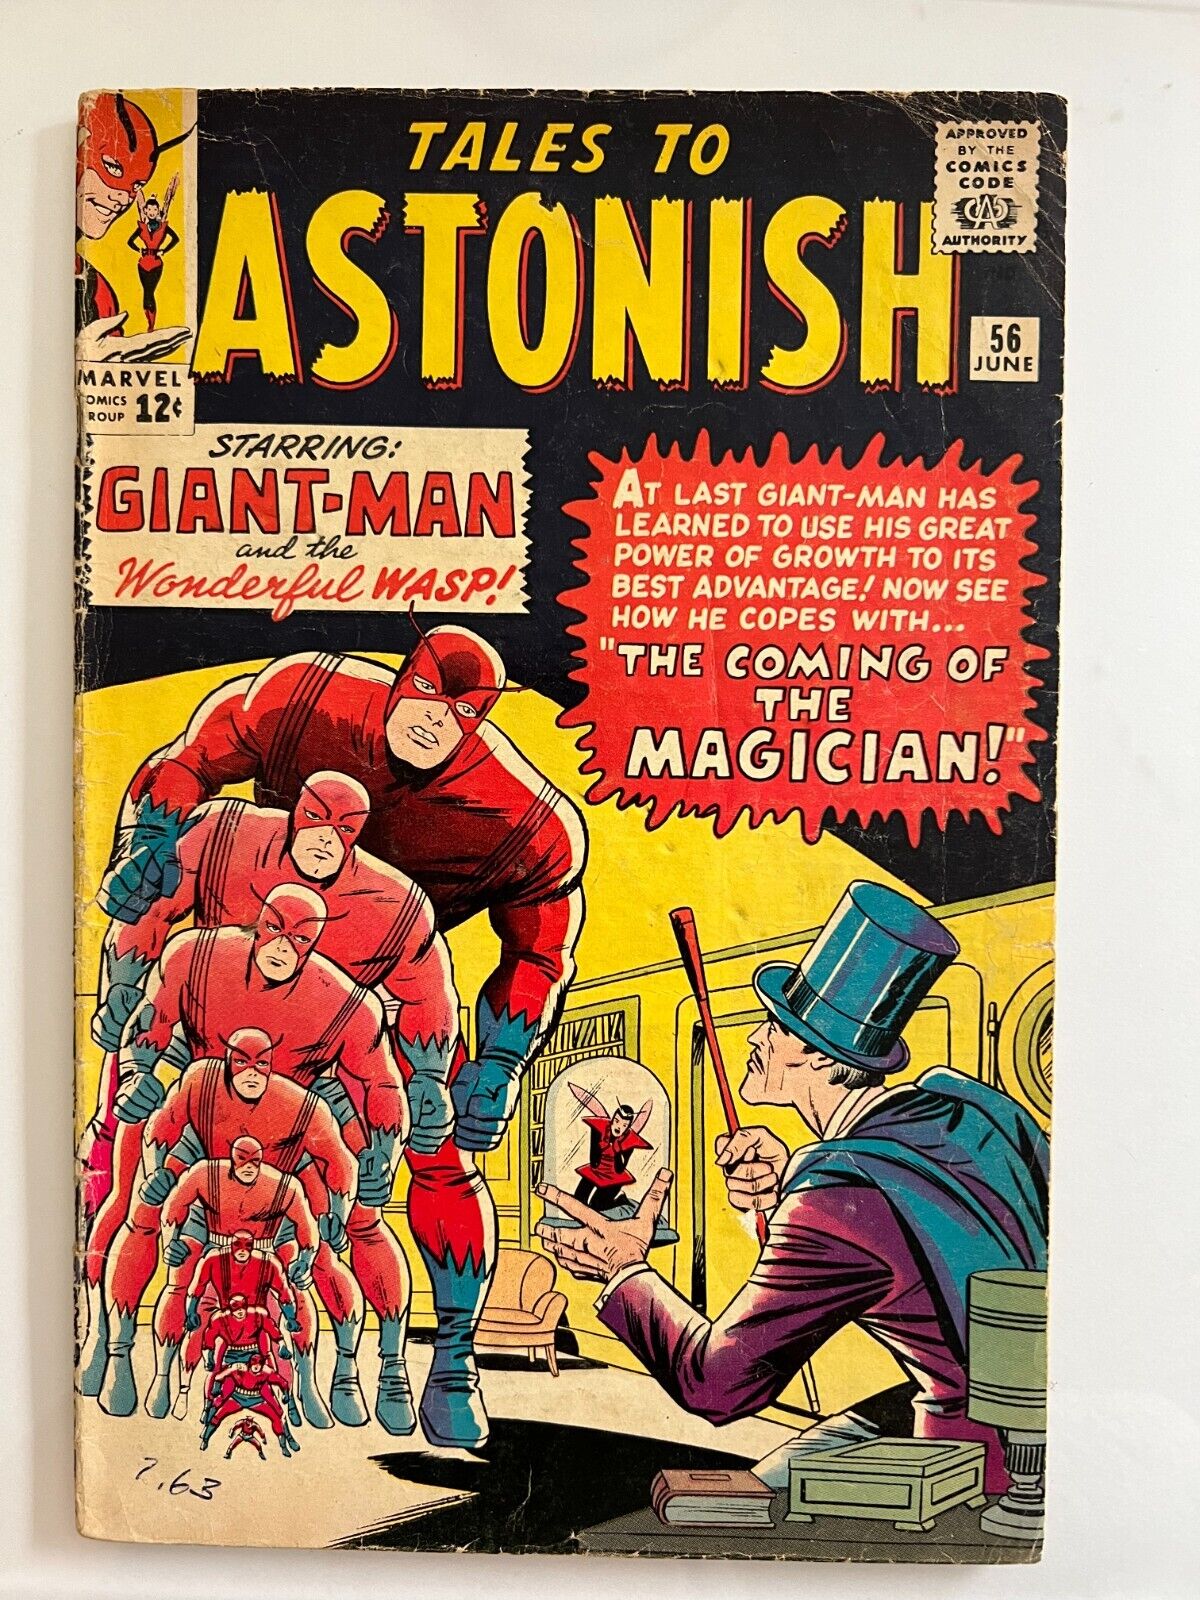 Tales to Astonish #56 (Marvel, 1964) Giant-Man and the Wasp battle the Magician.